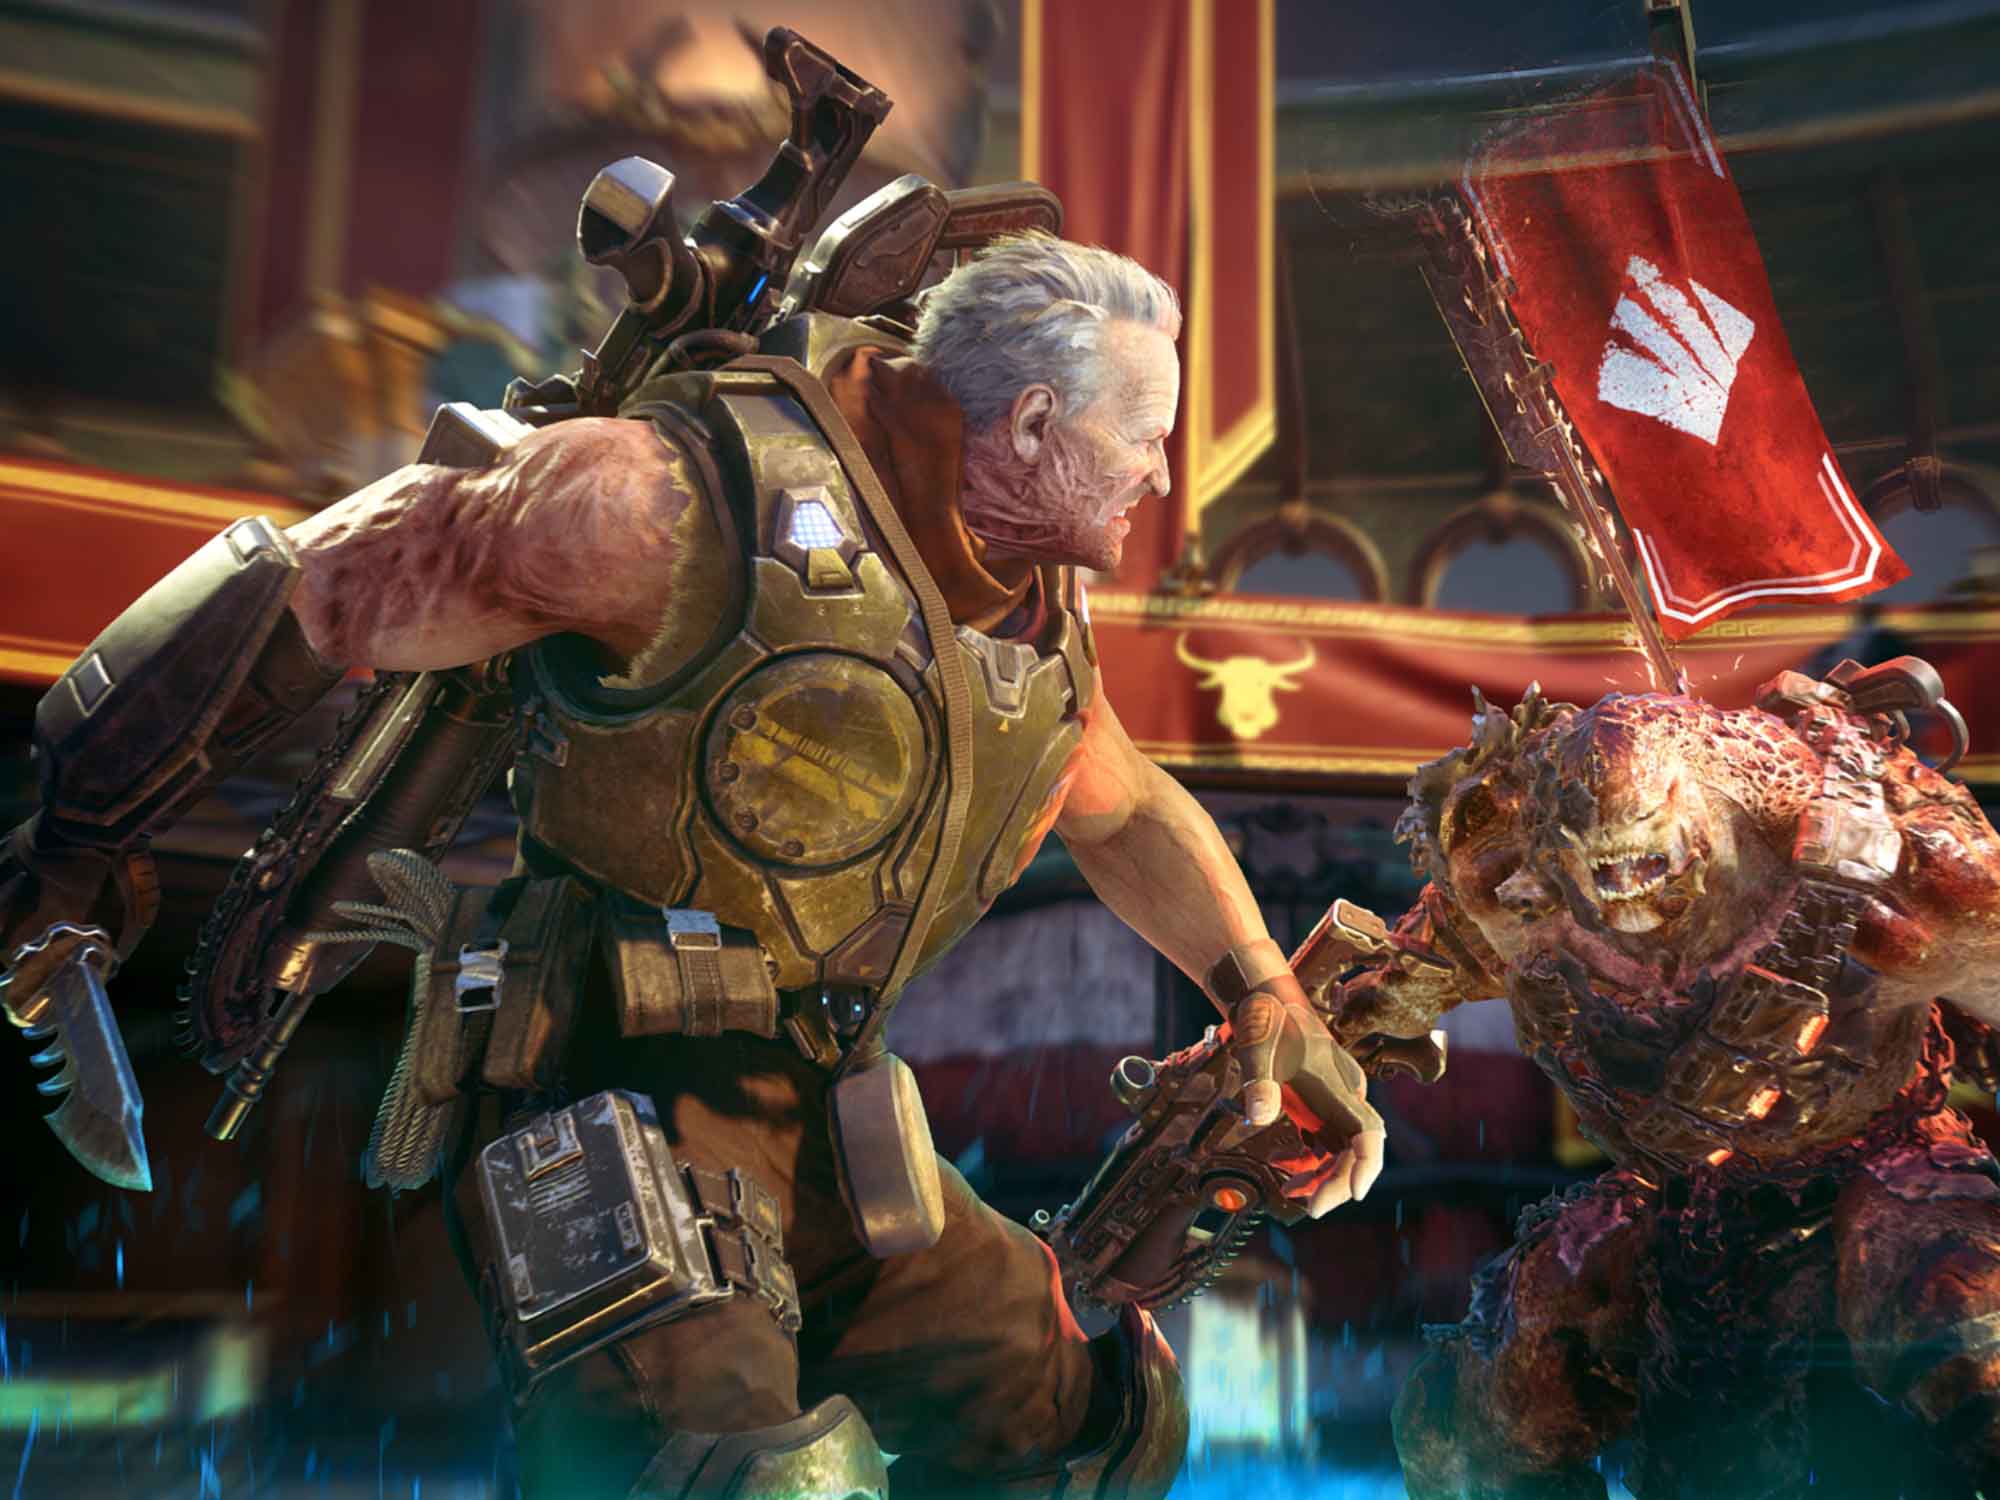 Gears 5 - Ultimate Edition DLC Content on Steam